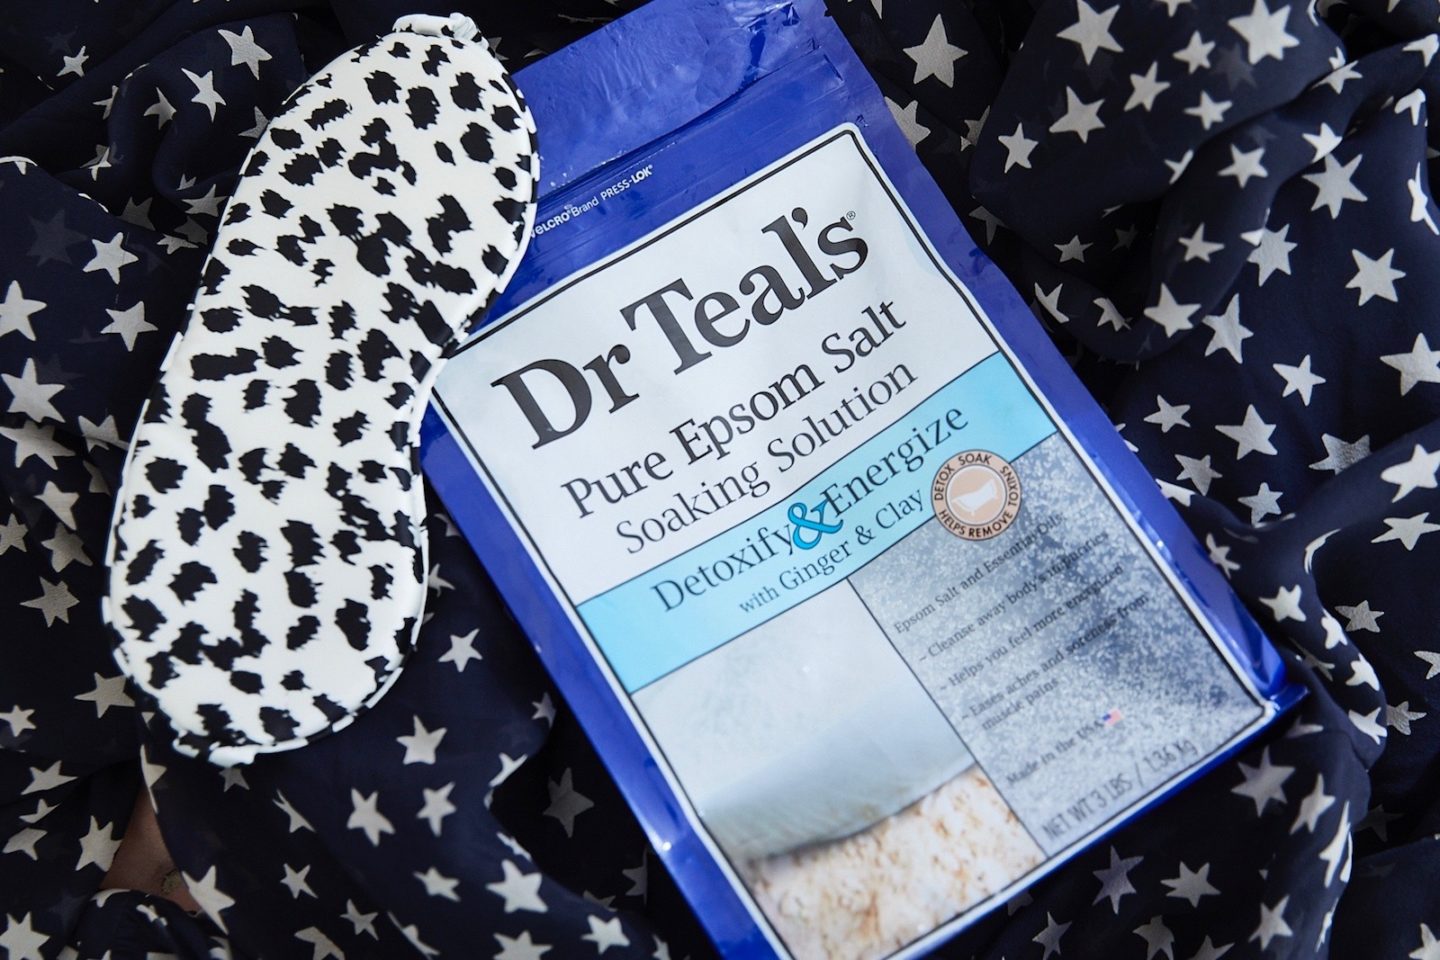 dr teals soaking solution review